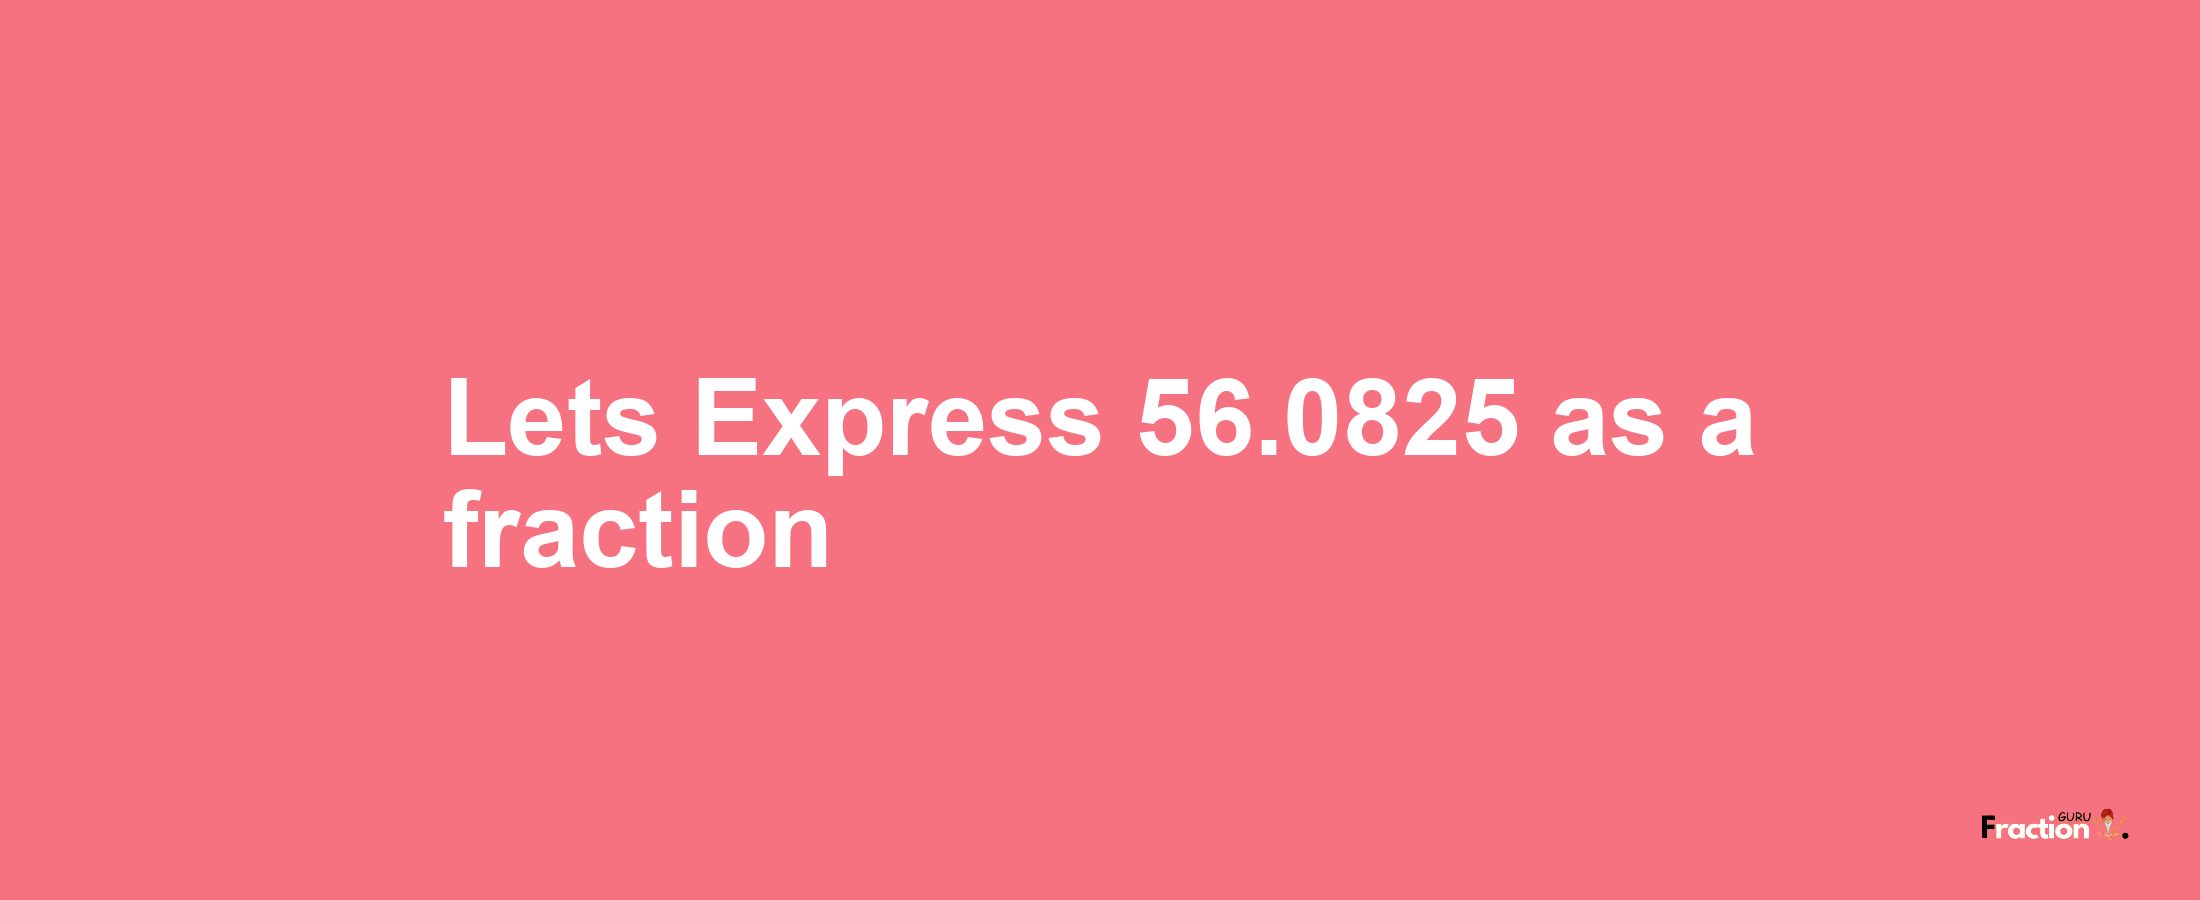 Lets Express 56.0825 as afraction